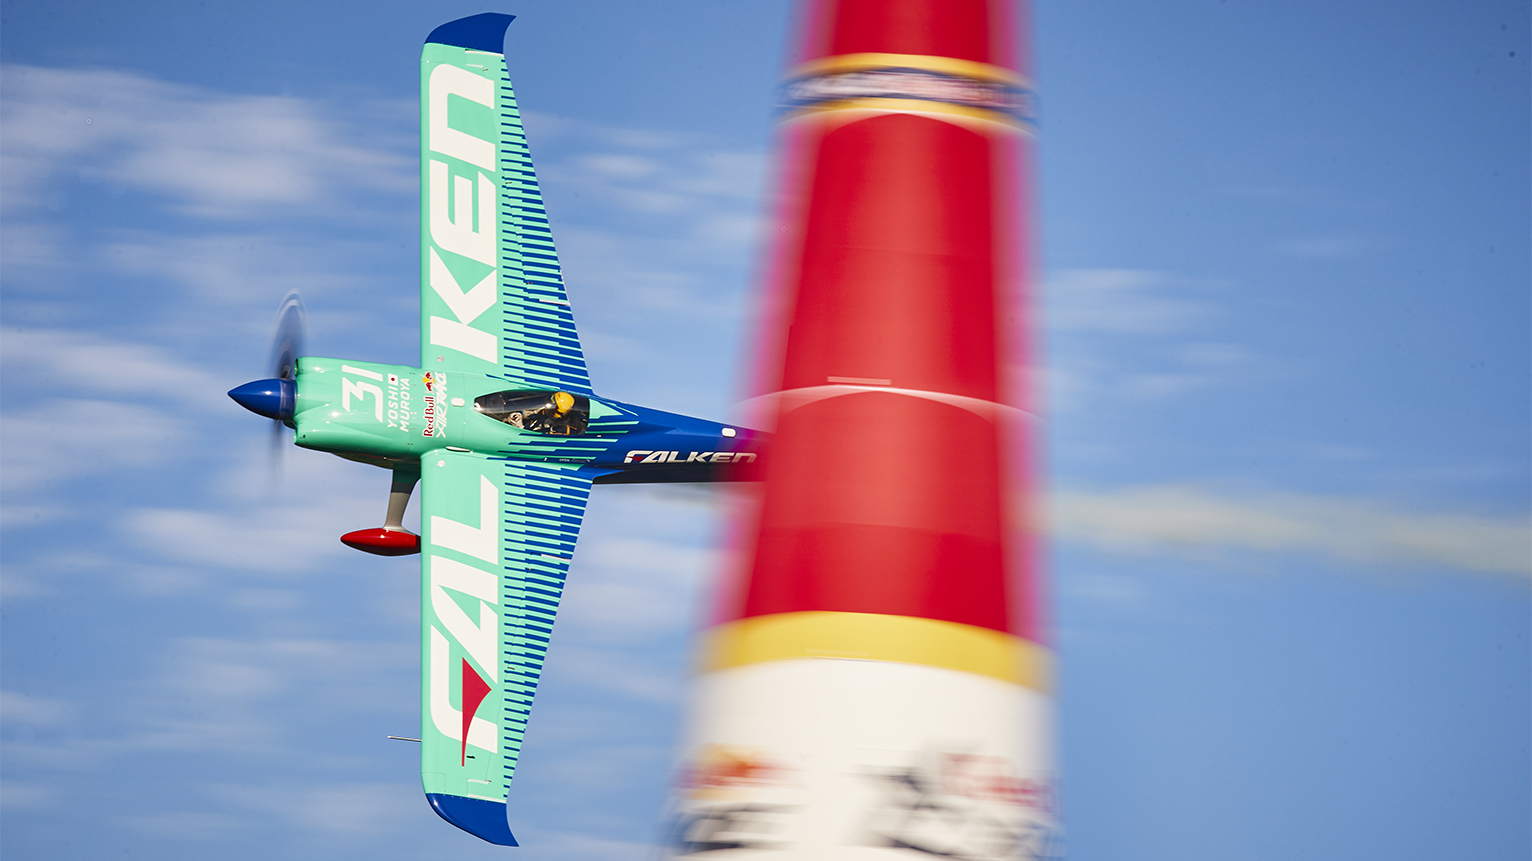 Yoshihide Muroya of Japan performs during qualifying day at the eighth round of the Red Bull Air Race World Championship at Indianapolis Motor Speedway. Photo by Andreas Langreiter / Red Bull Content Pool.